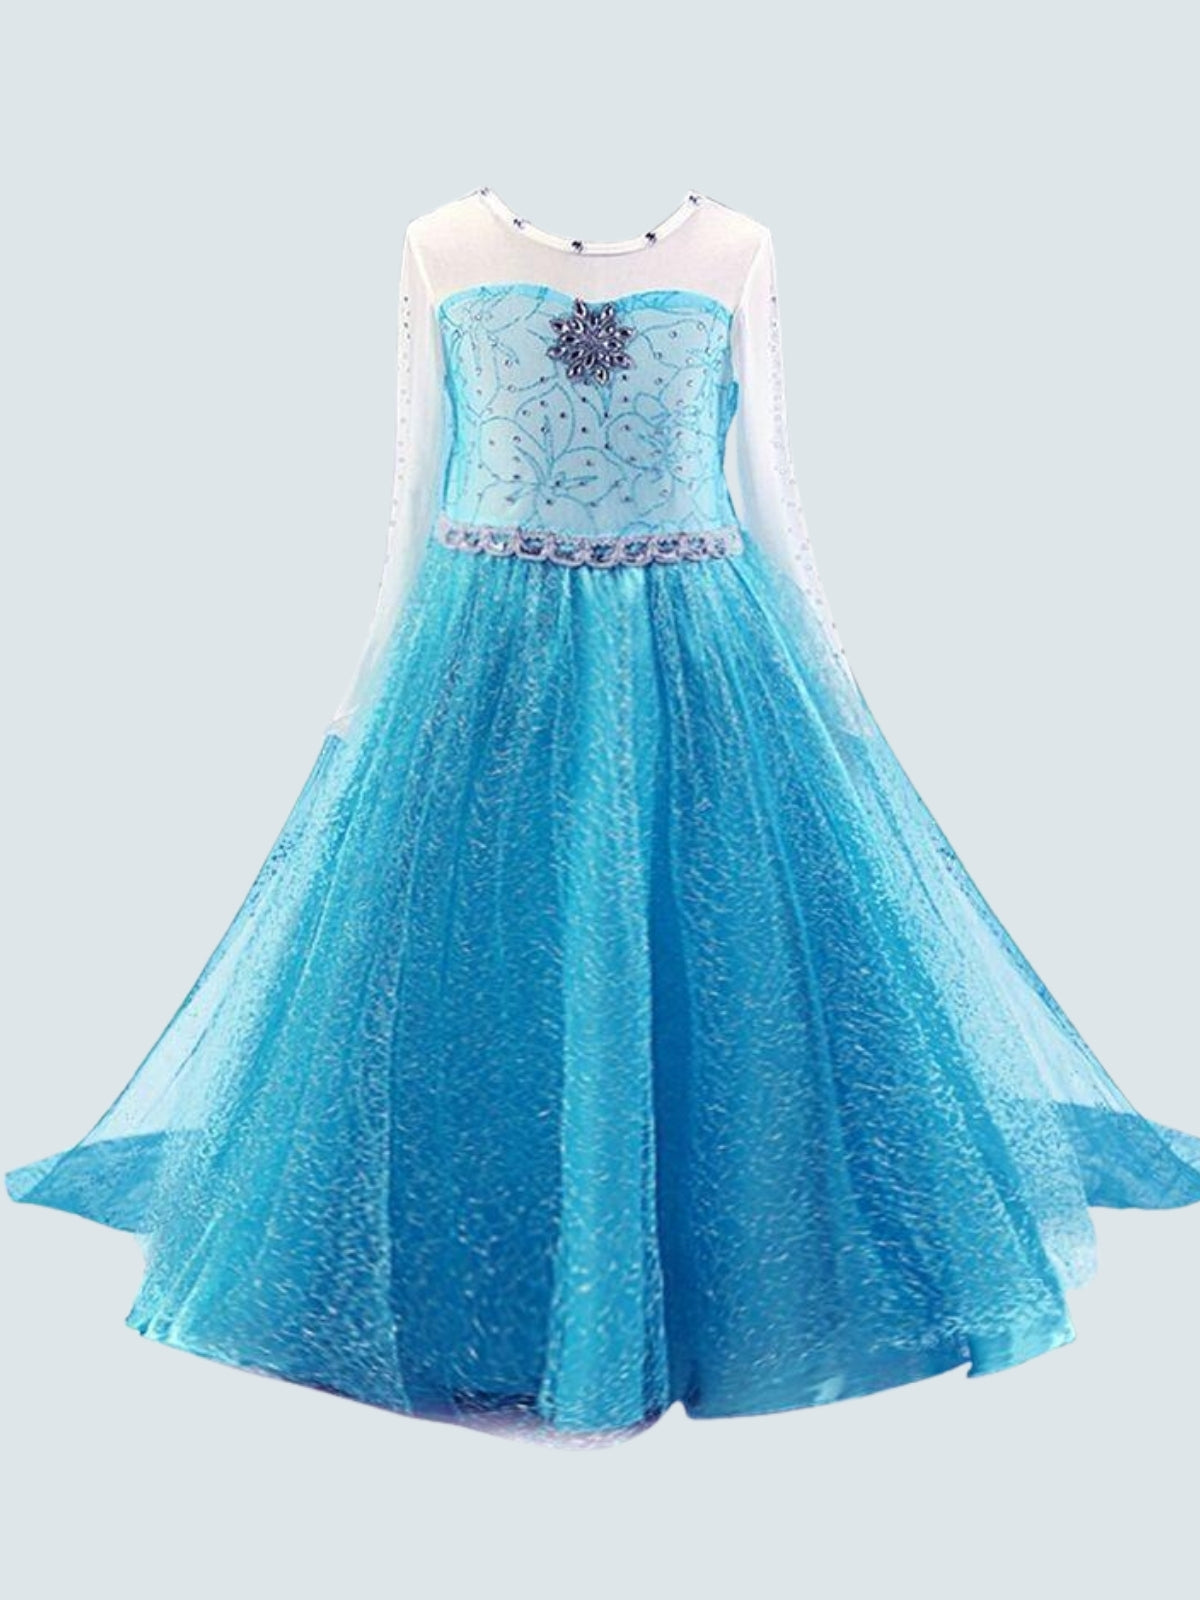 Frozen Elsa Inspired Gown For American Girl Dolls : Amazon.in: Toys & Games